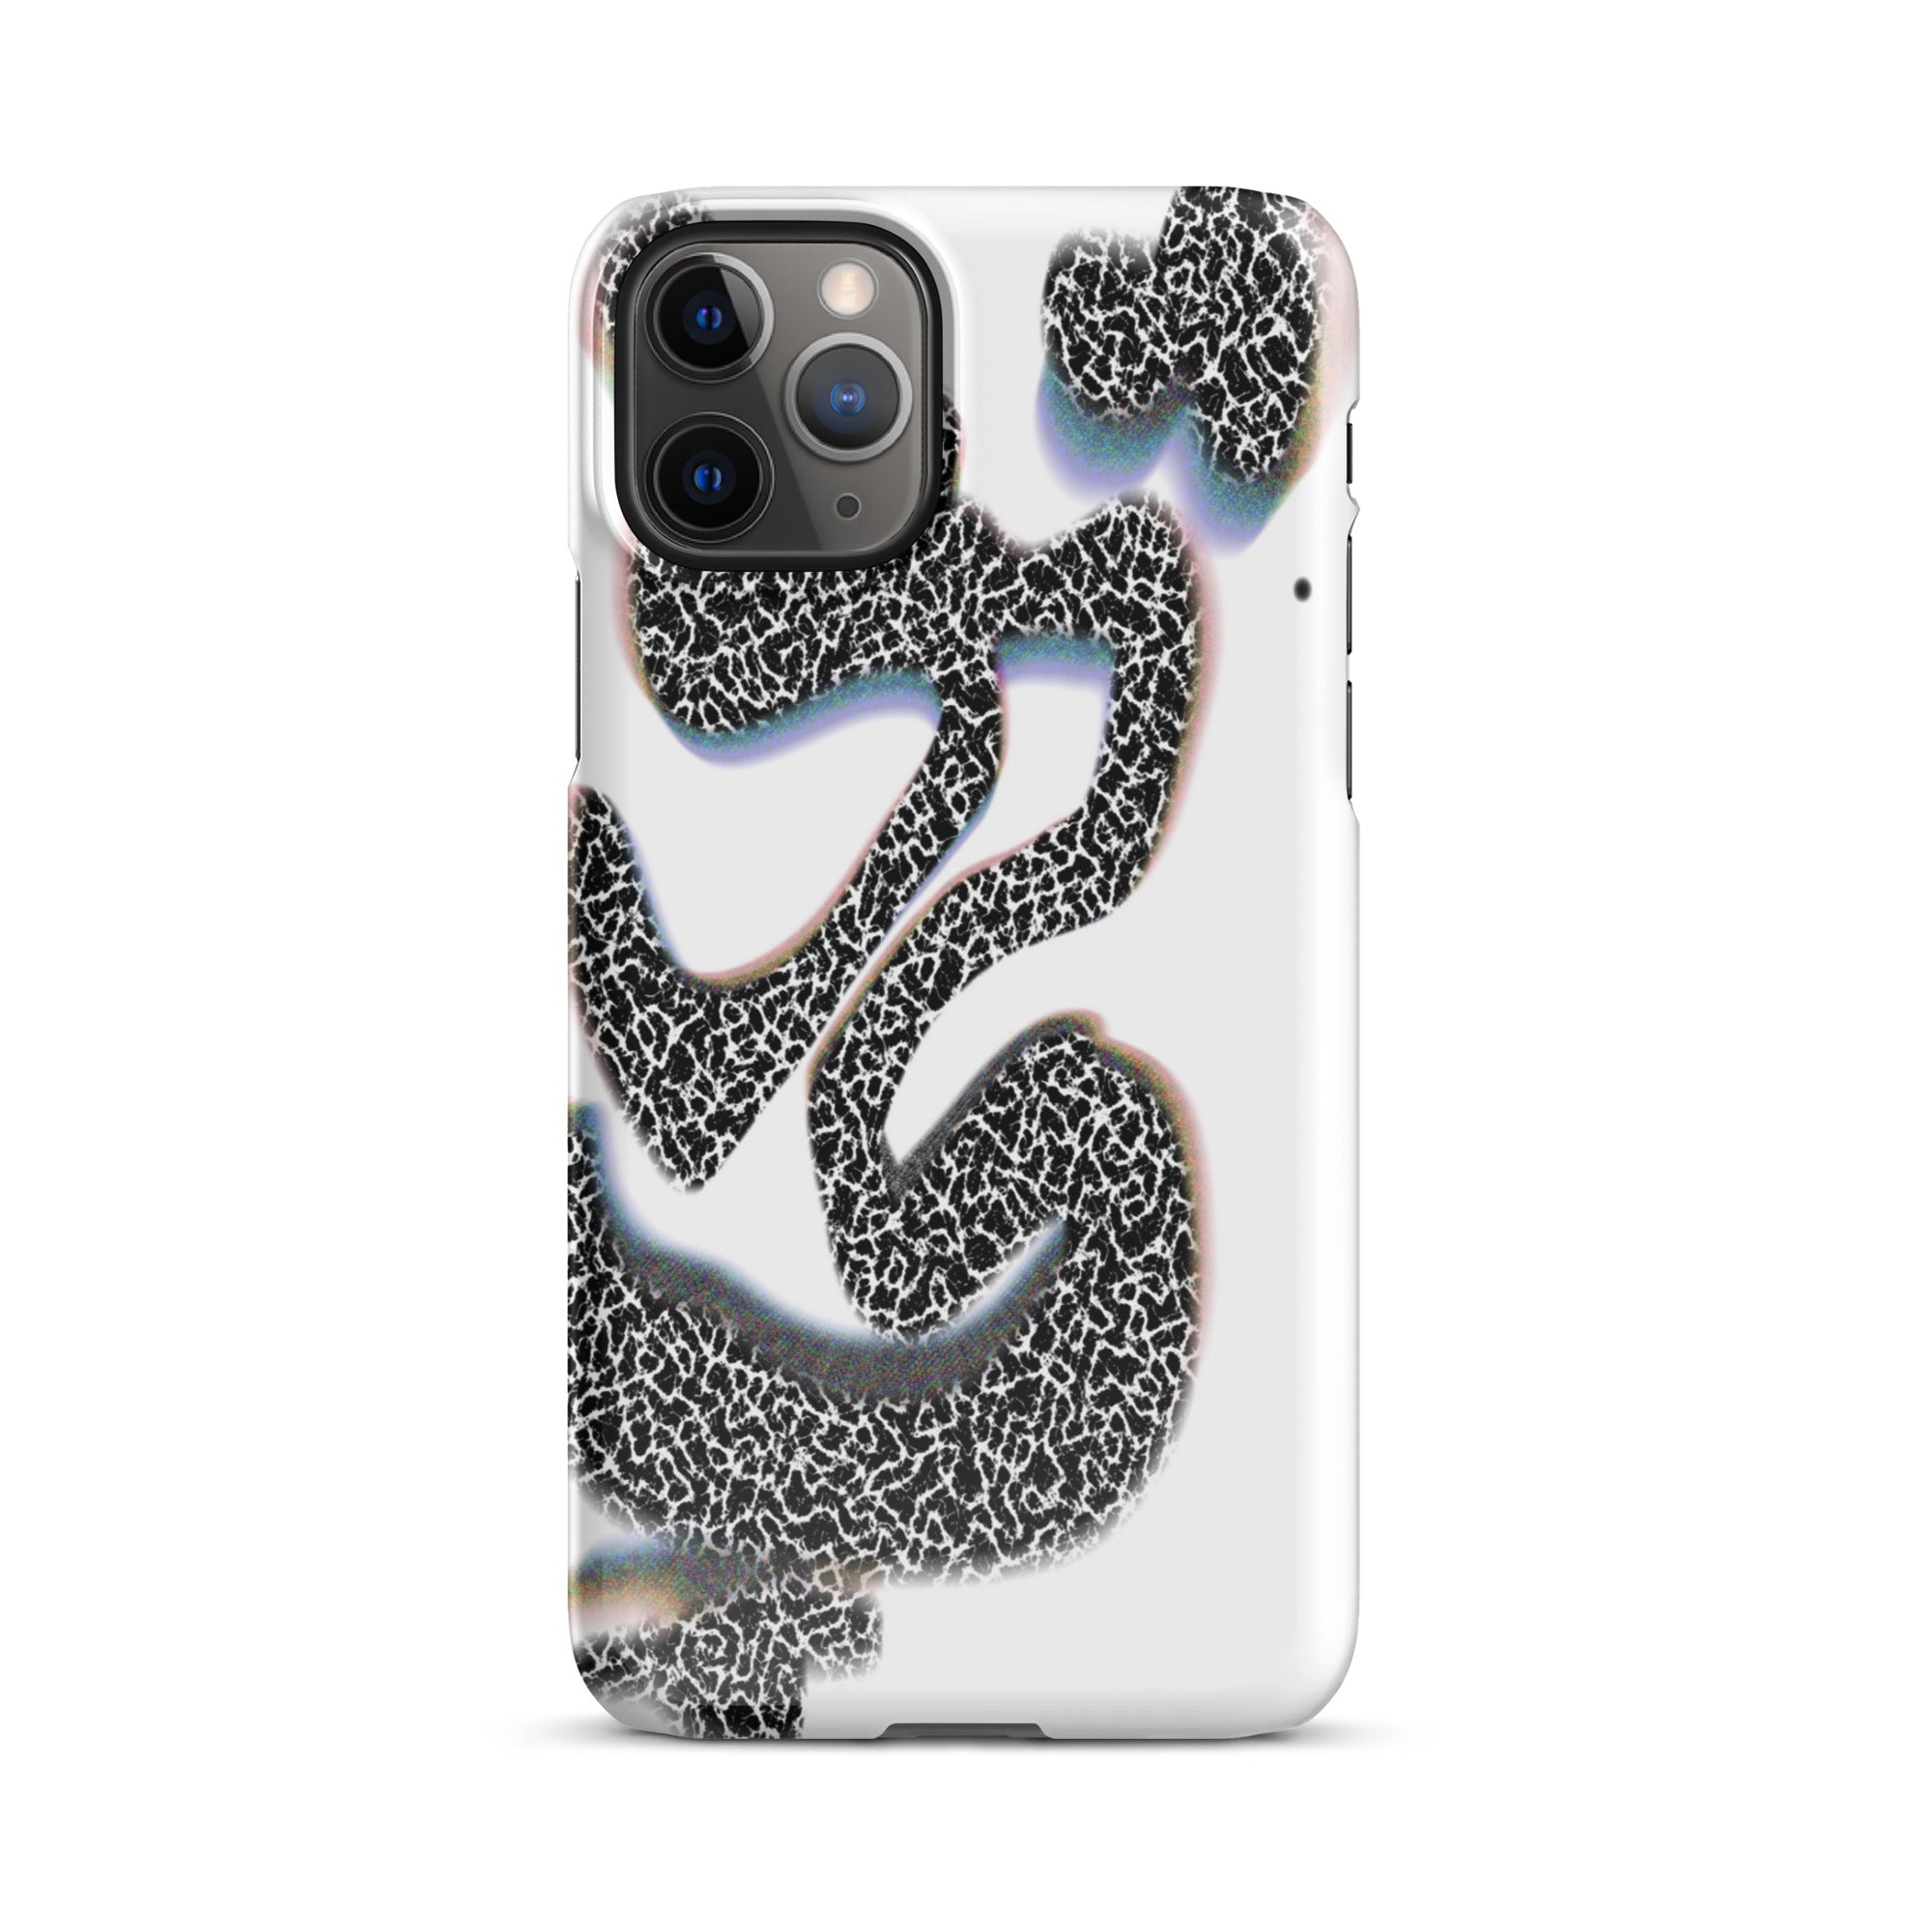 snap-case-for-iphone-glossy-iphone-11-pro-front-64d9bc46a06c4.jpg